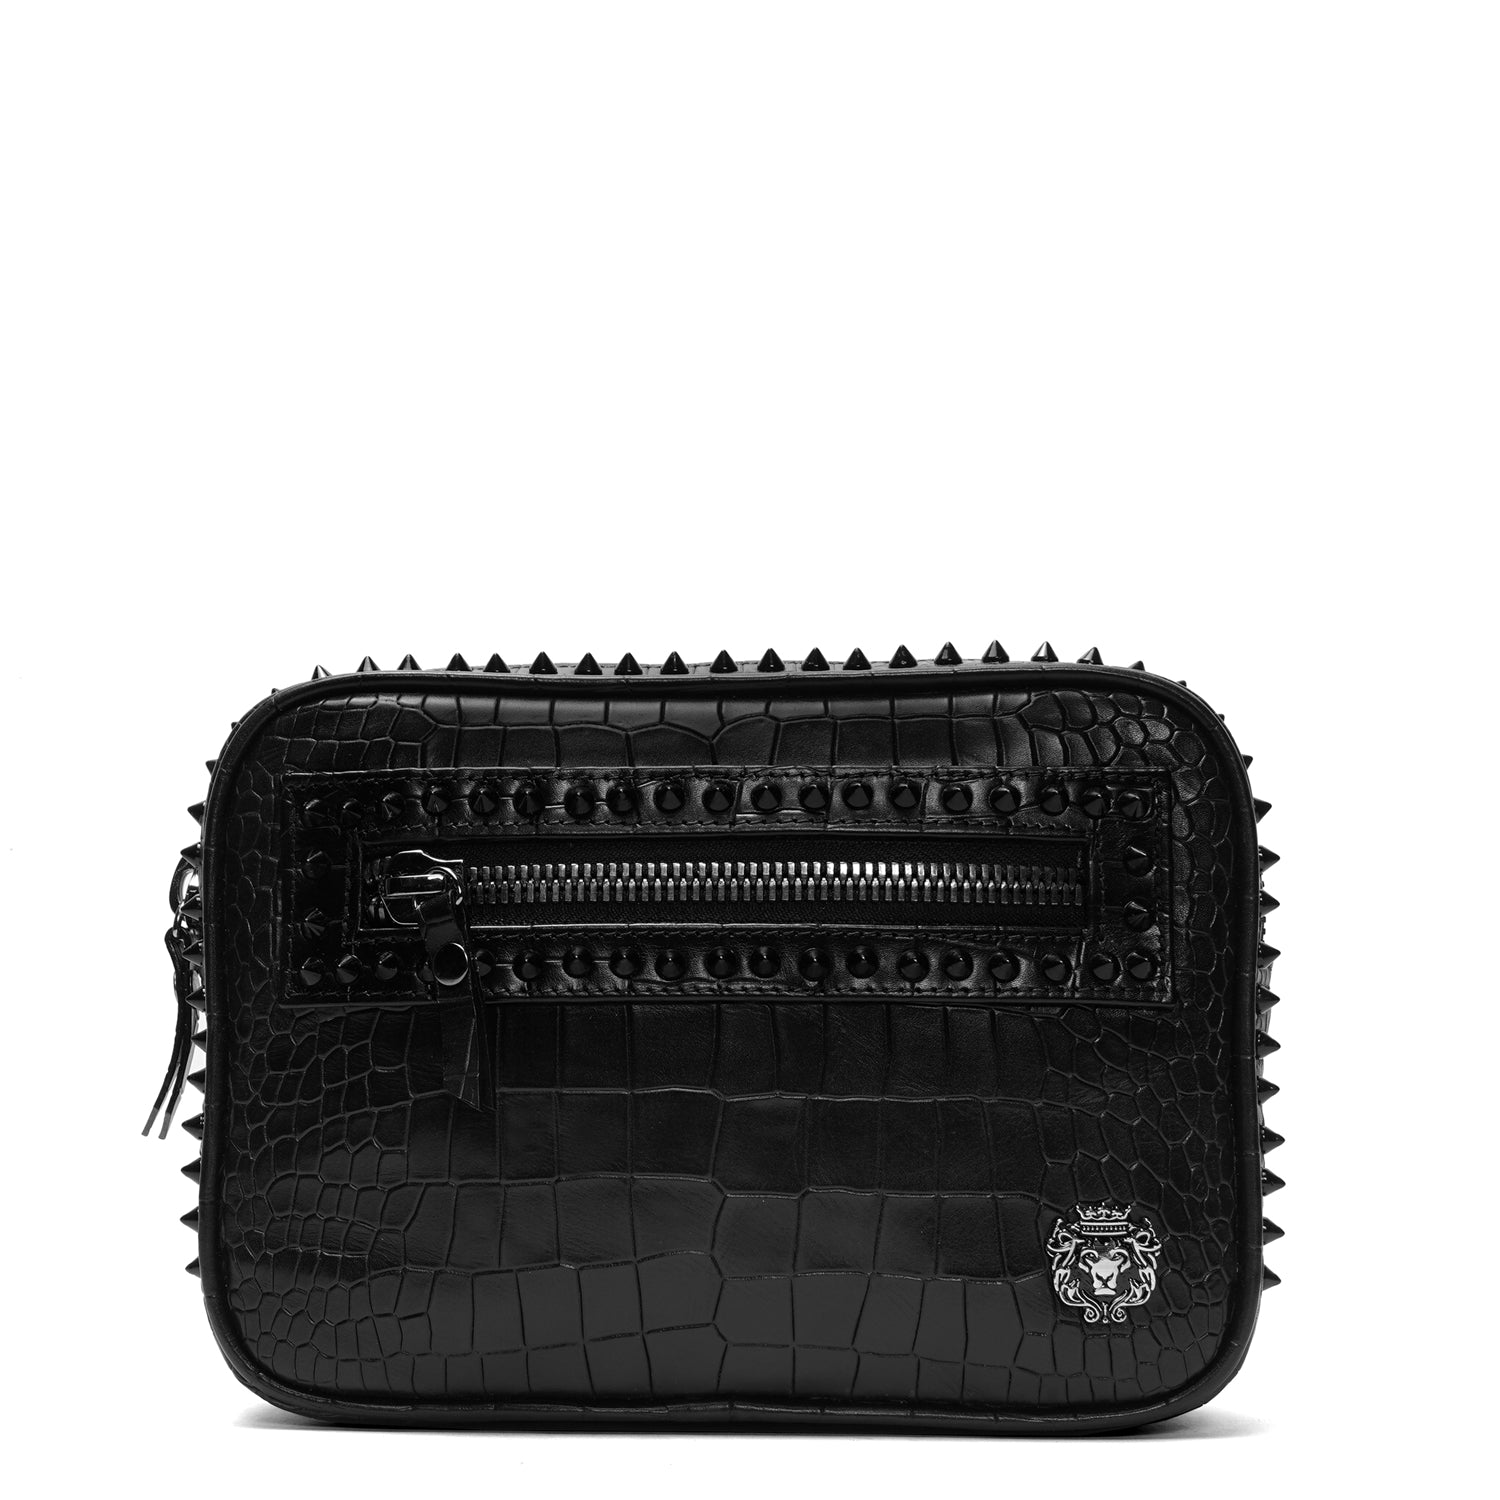 Studded fanny Pack Bag in Black Croco Texture Leather